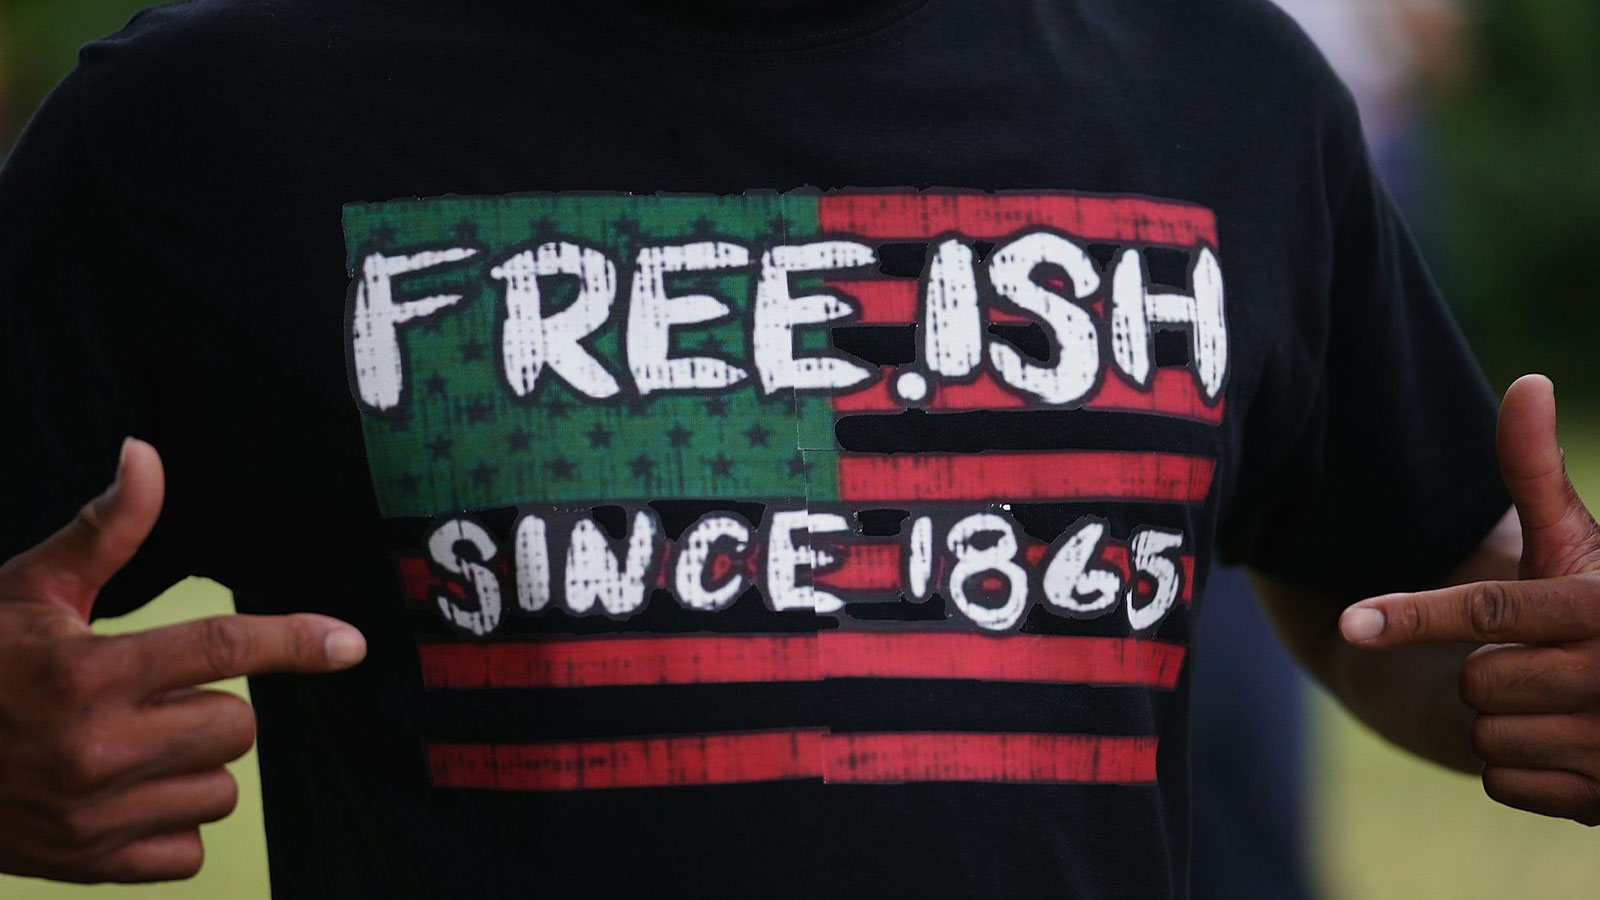 A man displays a shirt celebrating the freedom of enslaved Black people during a Juneteenth celebration in Tulsa, Okla.